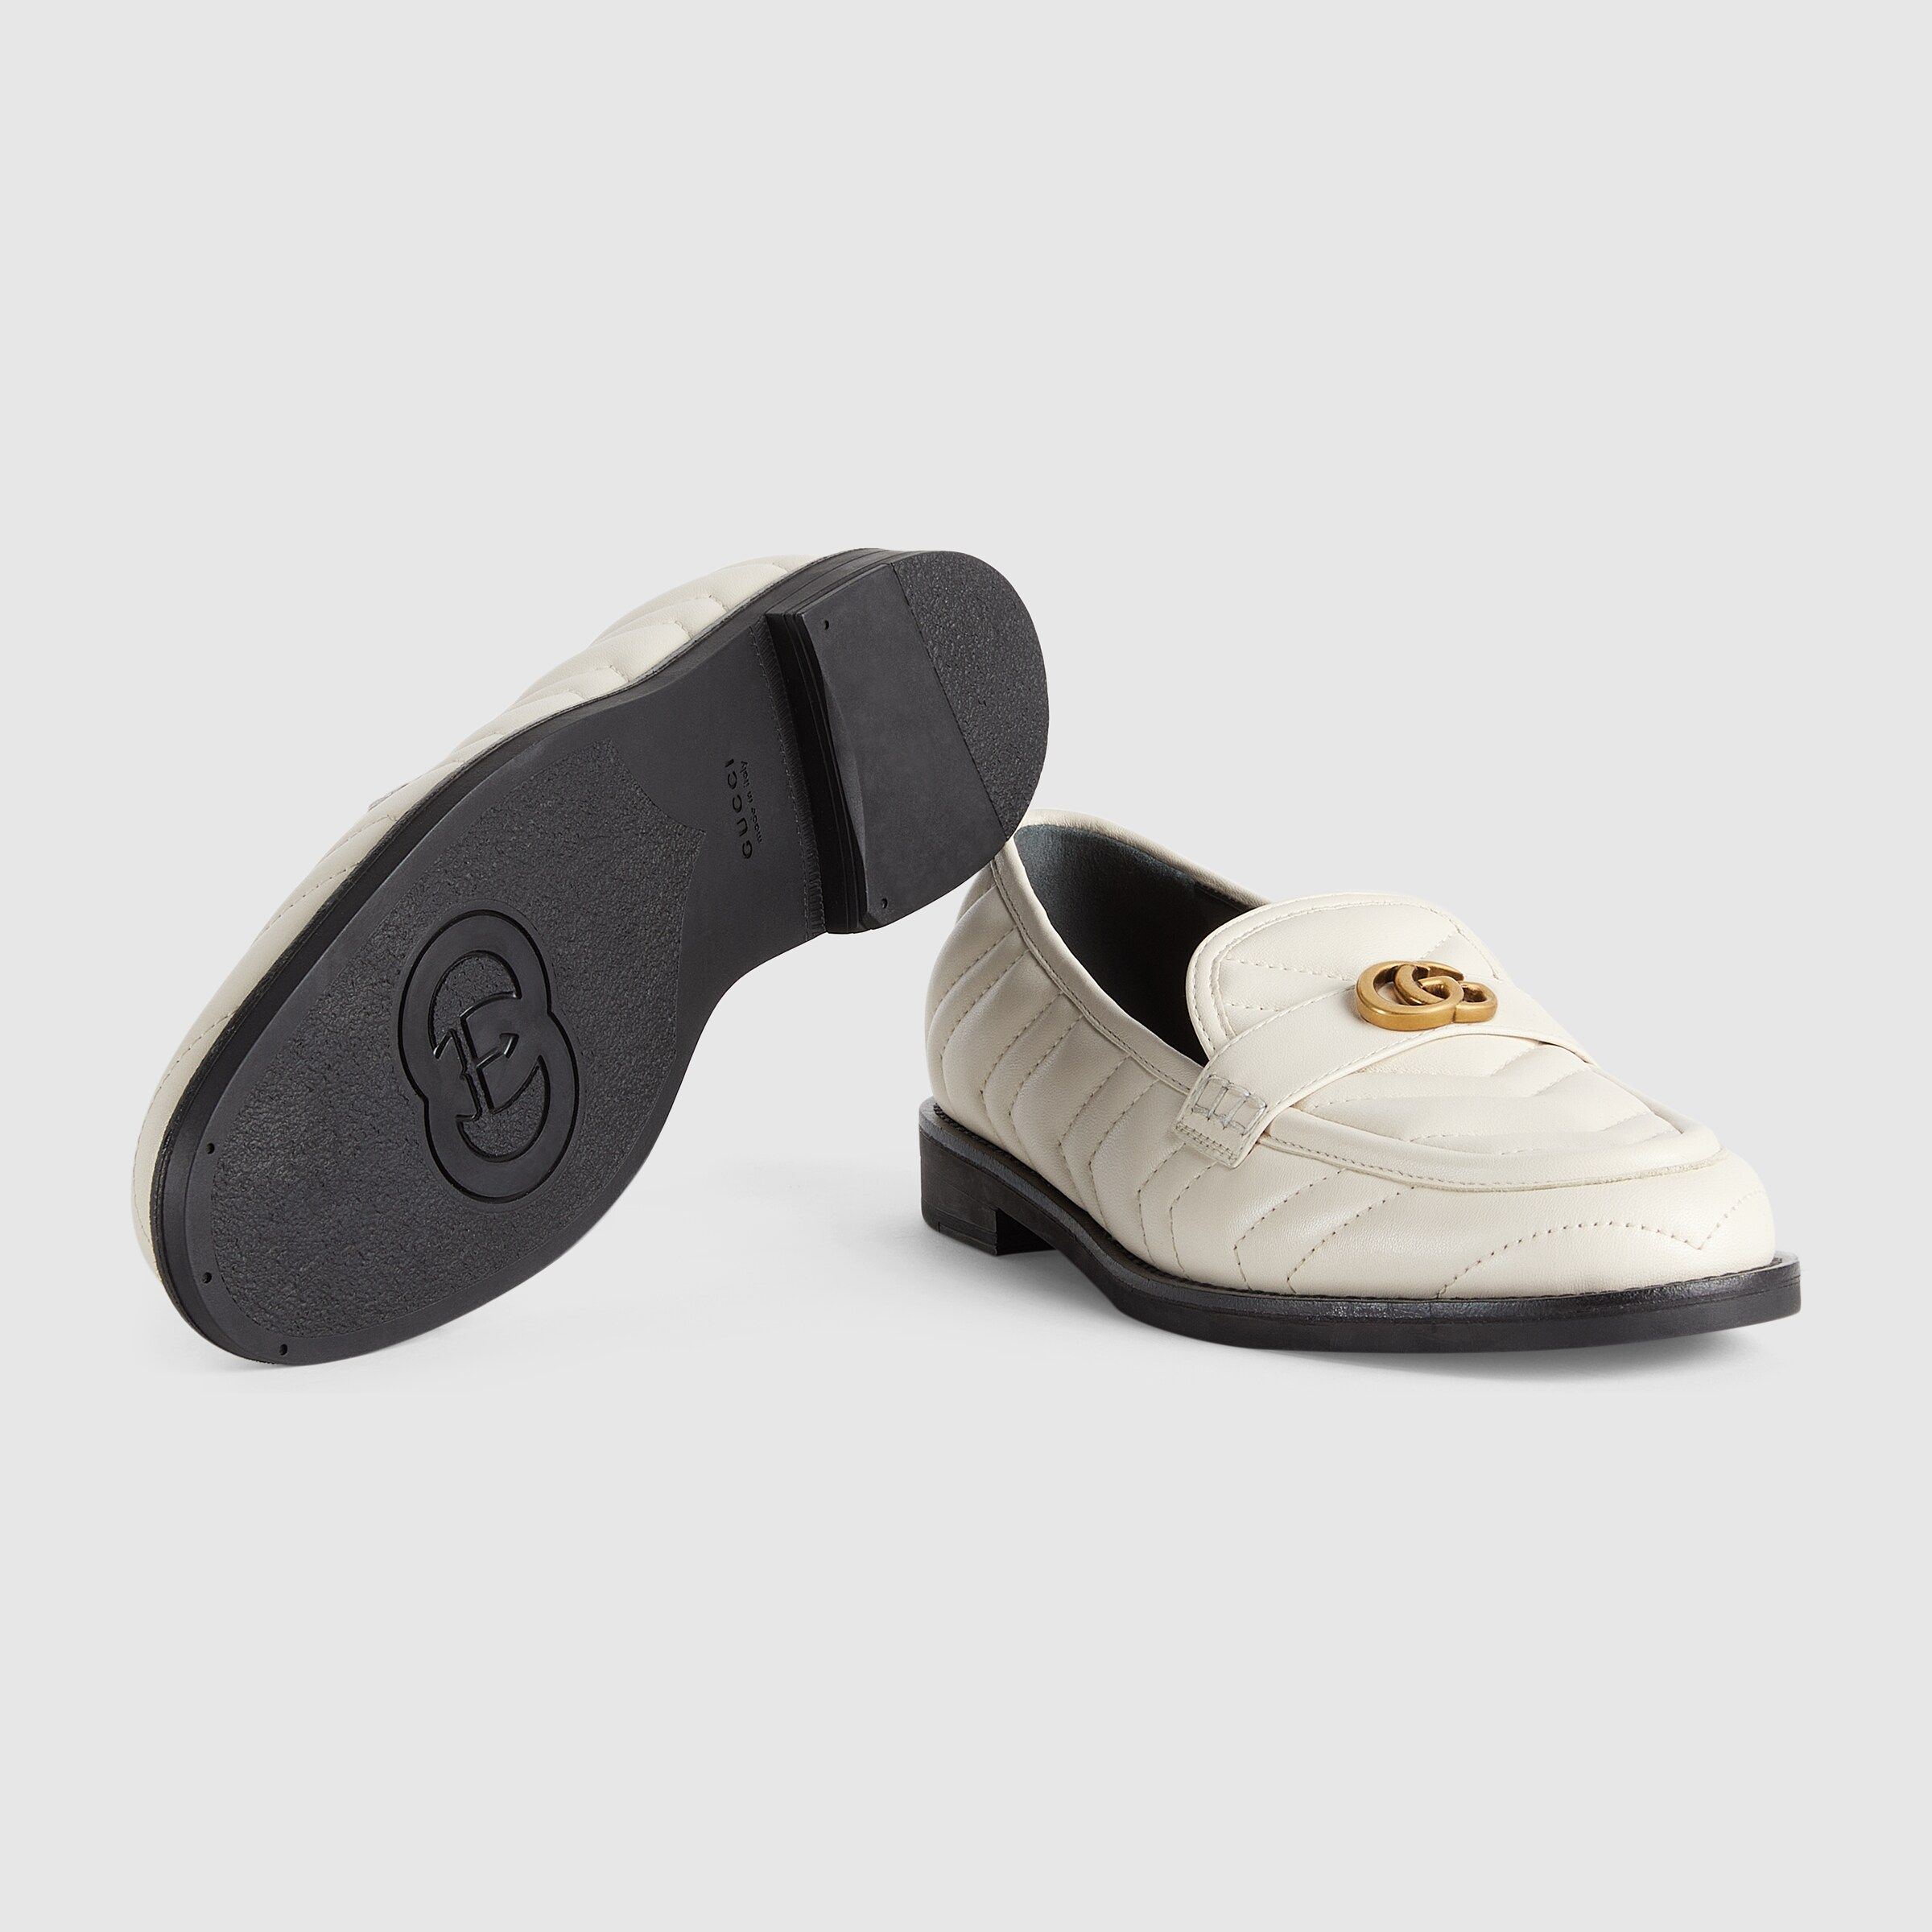 Women's loafer with Double G | Gucci (UK)